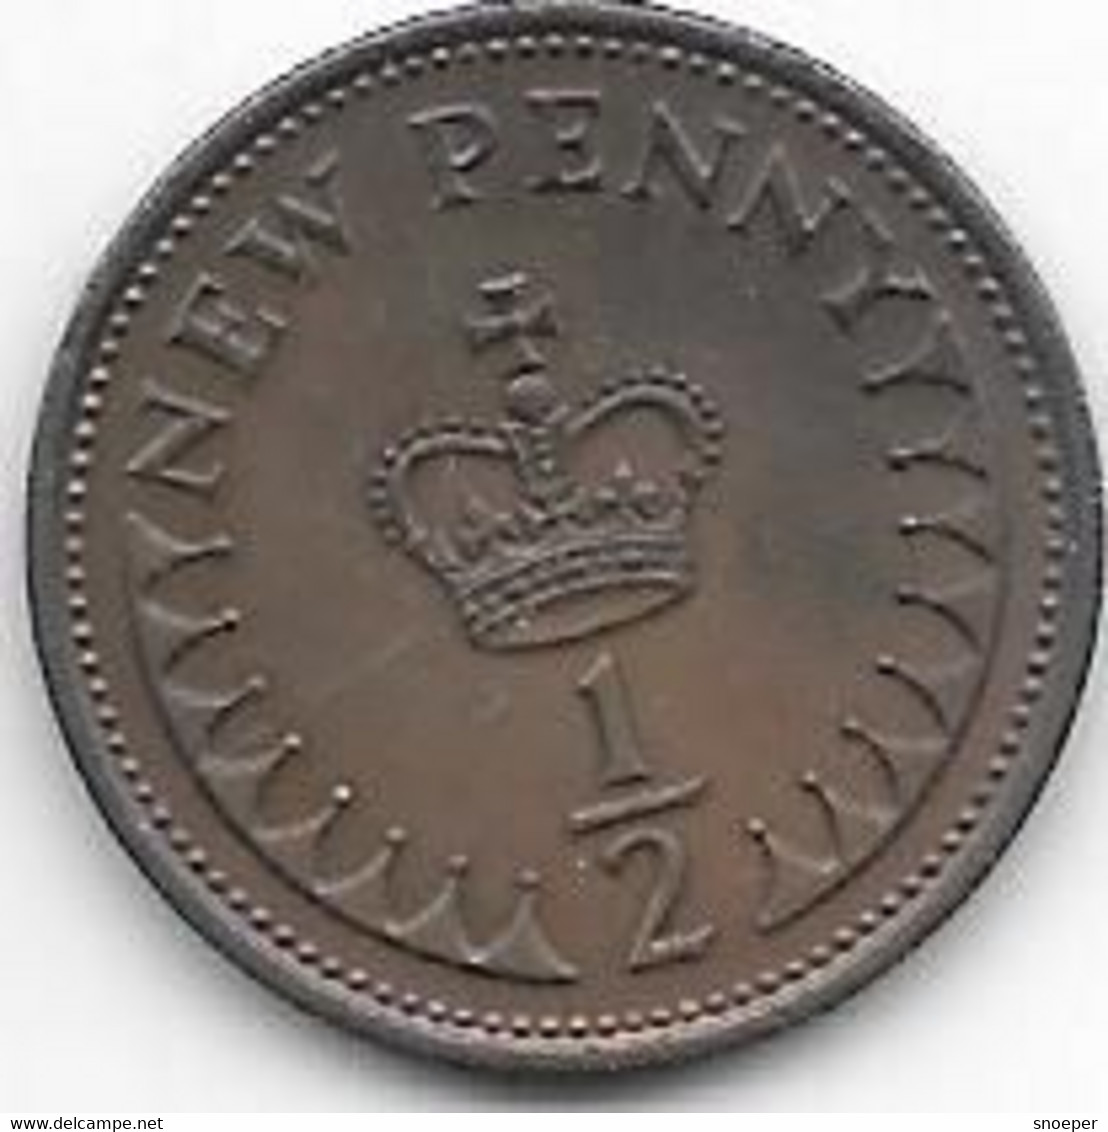 Great Britain 1/2 Penny 1974  Km 914  Xf+/ms60 - 1/2 Penny & 1/2 New Penny